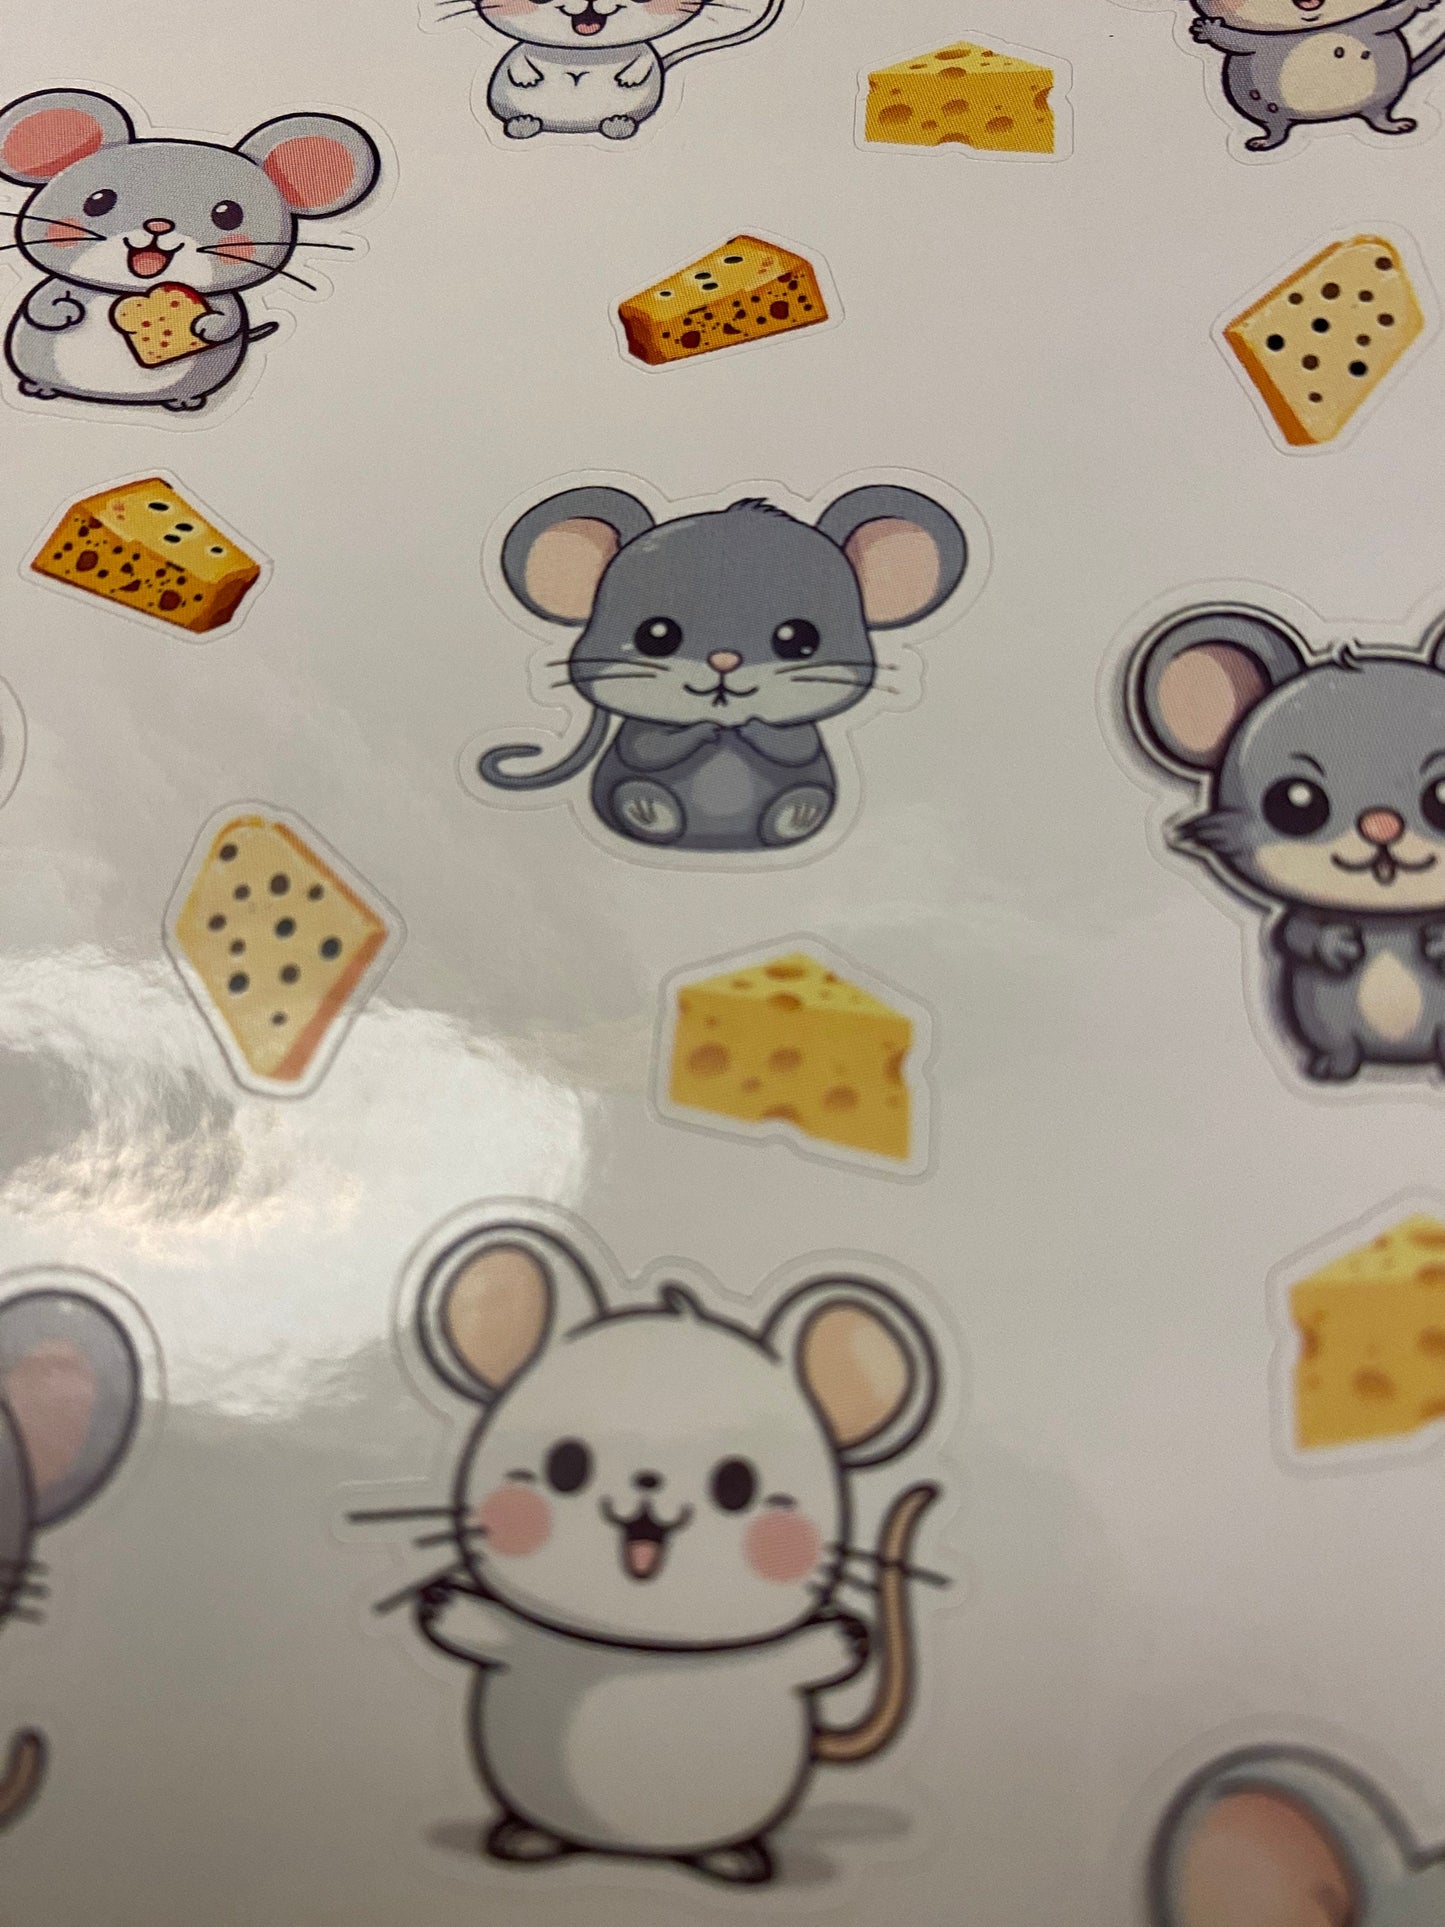 16 Mice Sticker Sheet with cheese, cute mice with cheese, Kawaii mice sticker sheet